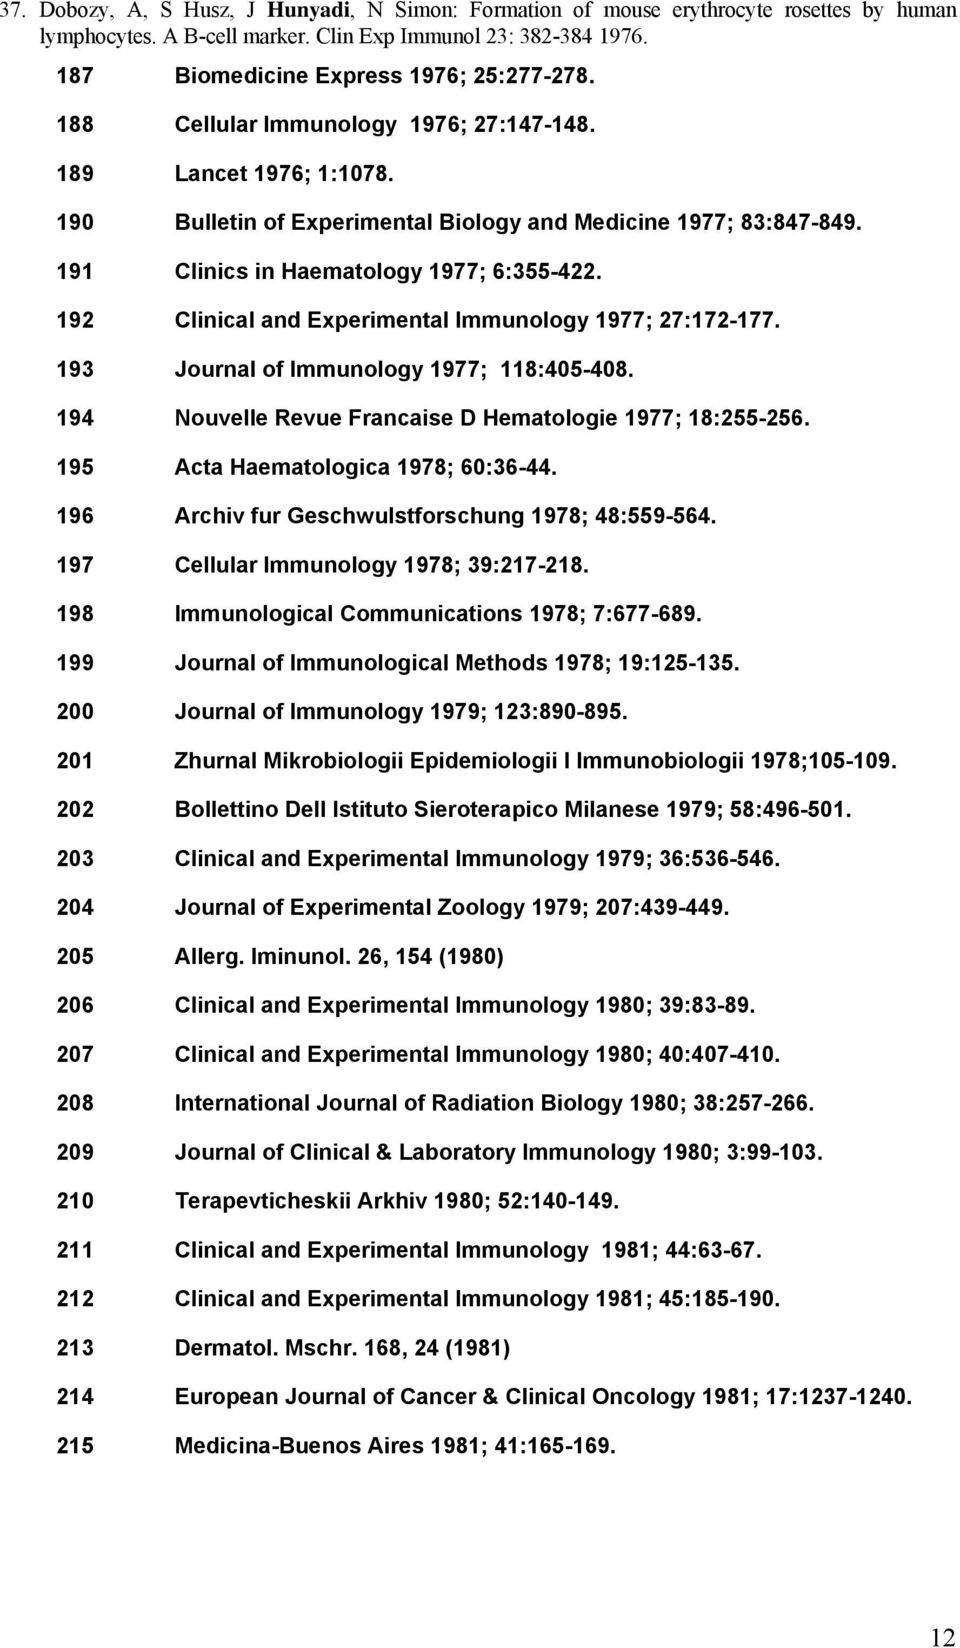 192 Clinical and Experimental Immunology 1977; 27:172-177. 193 Journal of Immunology 1977; 118:405-408. 194 Nouvelle Revue Francaise D Hematologie 1977; 18:255-256.